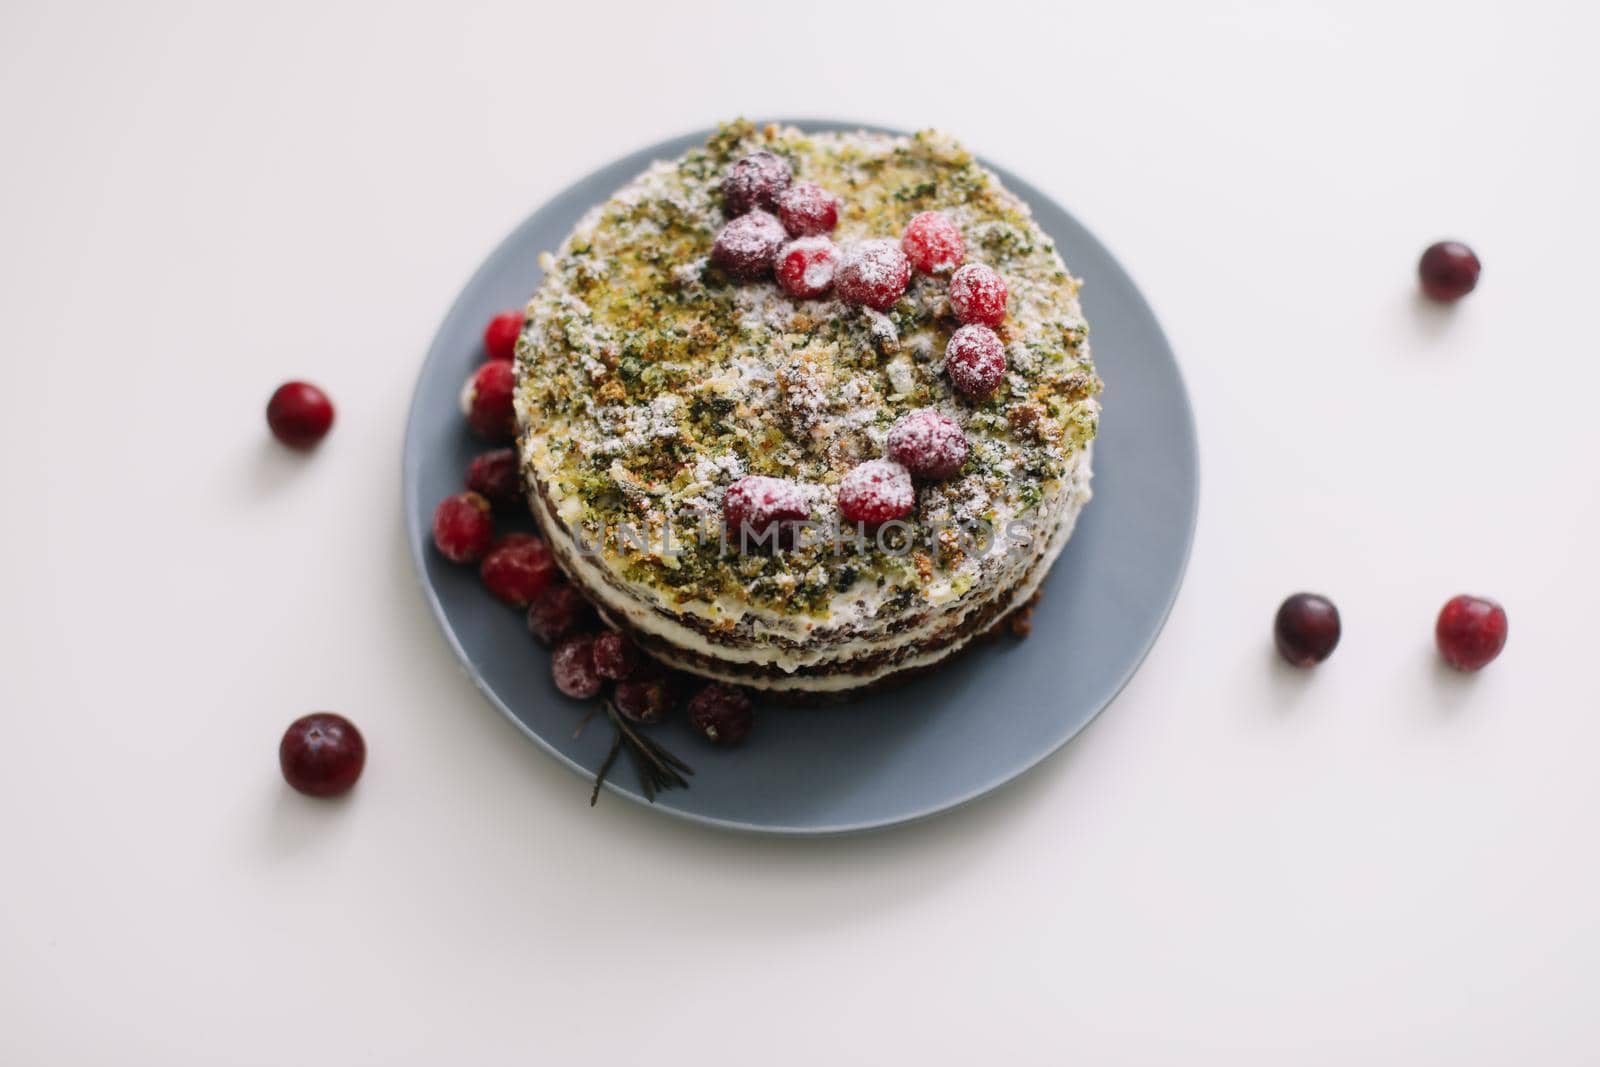  cake with spinach and cream decorated with fresh cranberries, healthy nutrition, diet breakfast